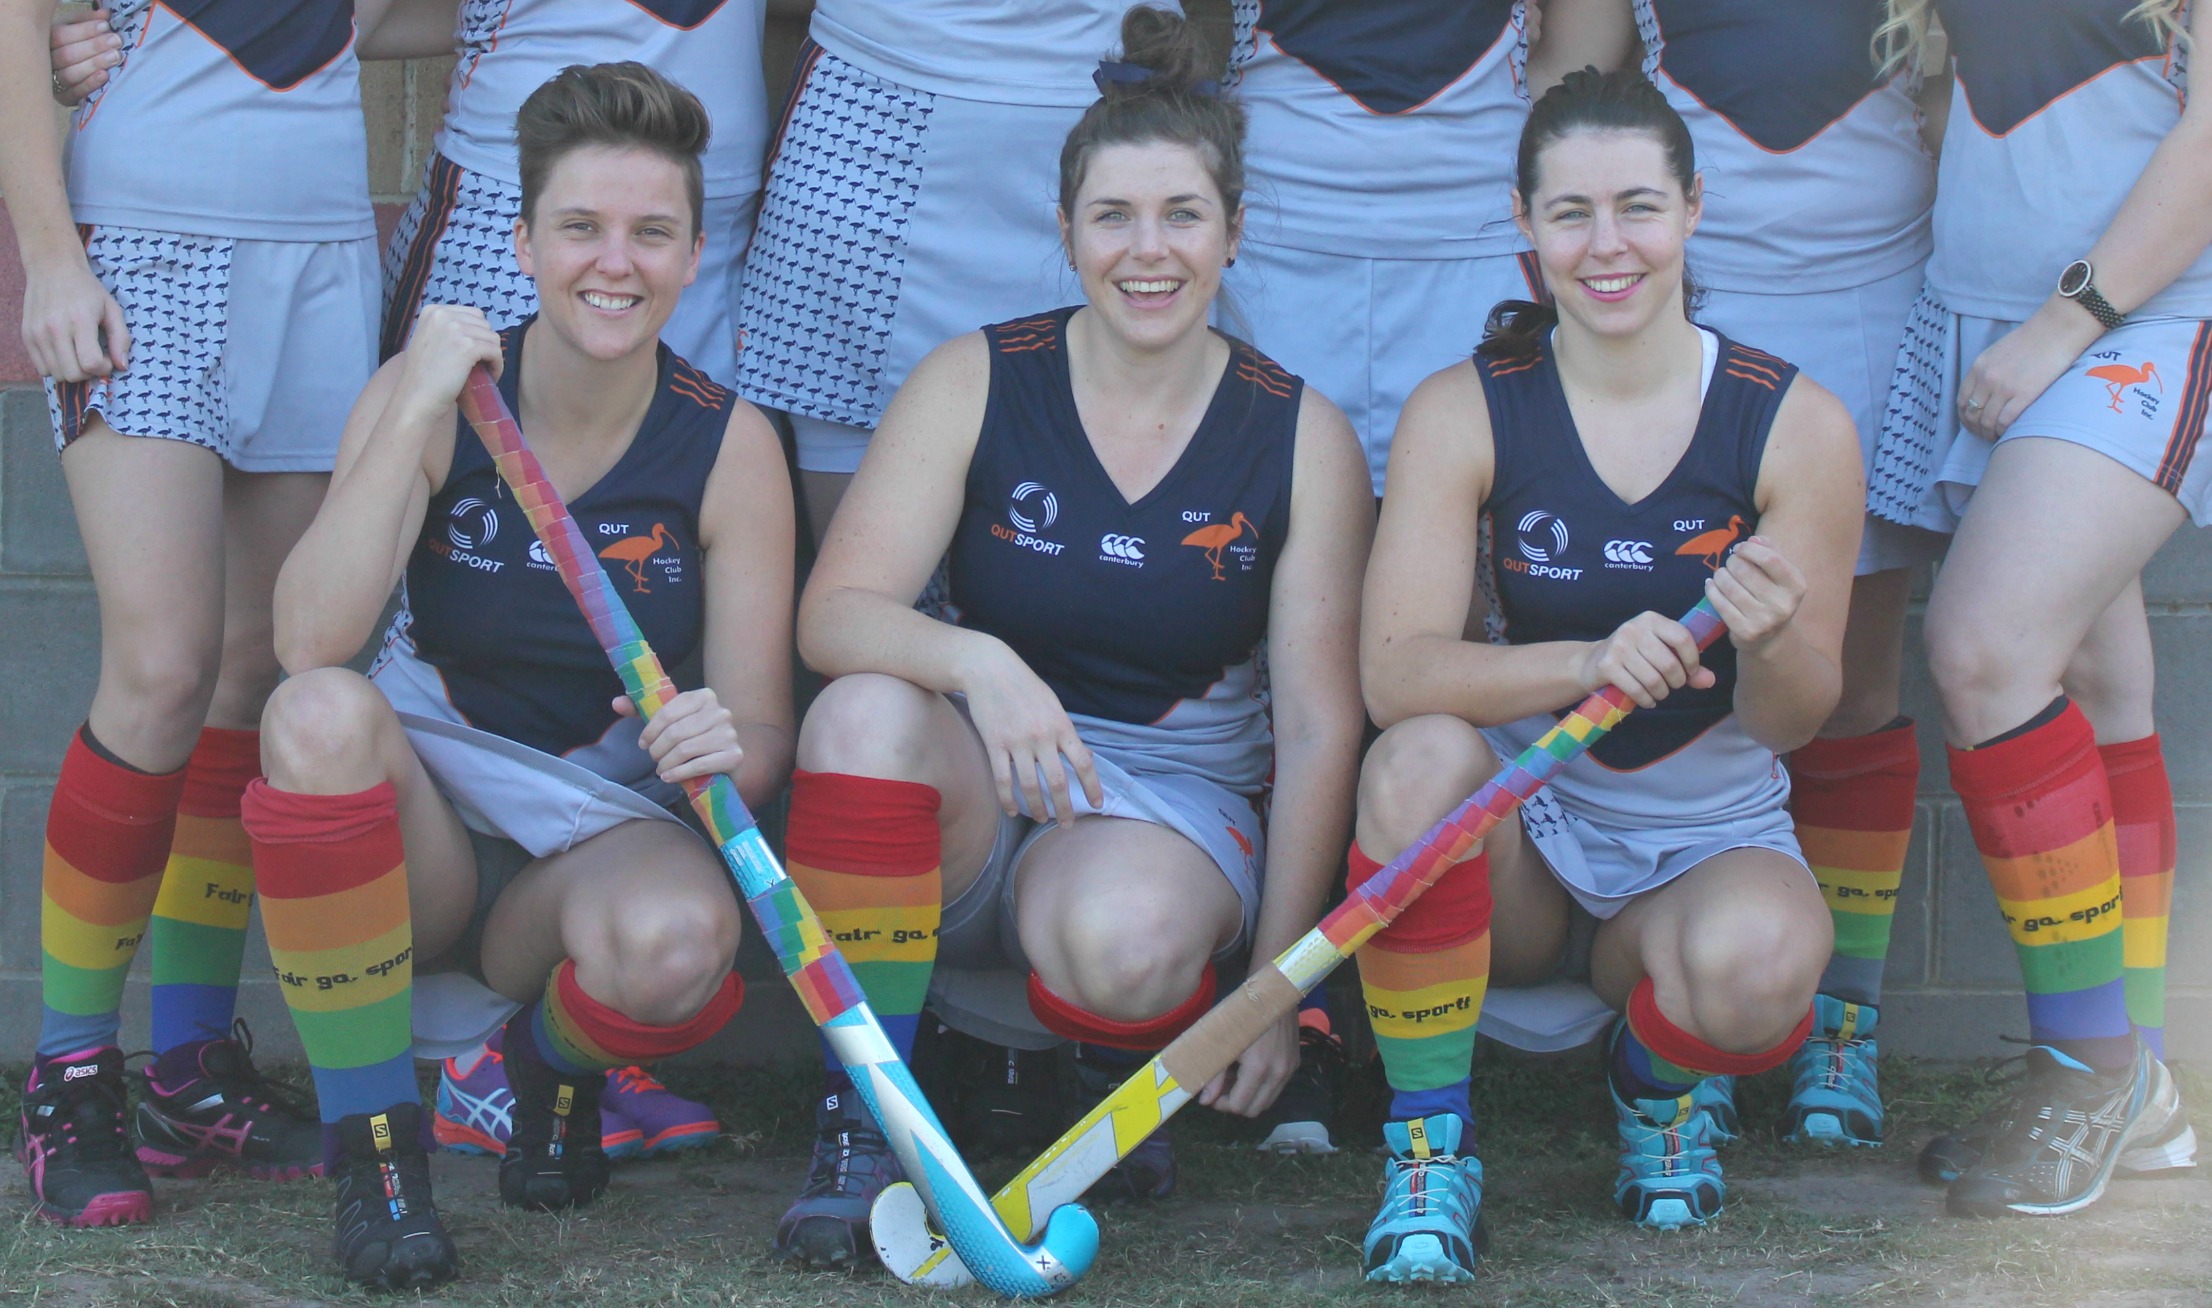 Queensland hockey players fighting for diversity in sport